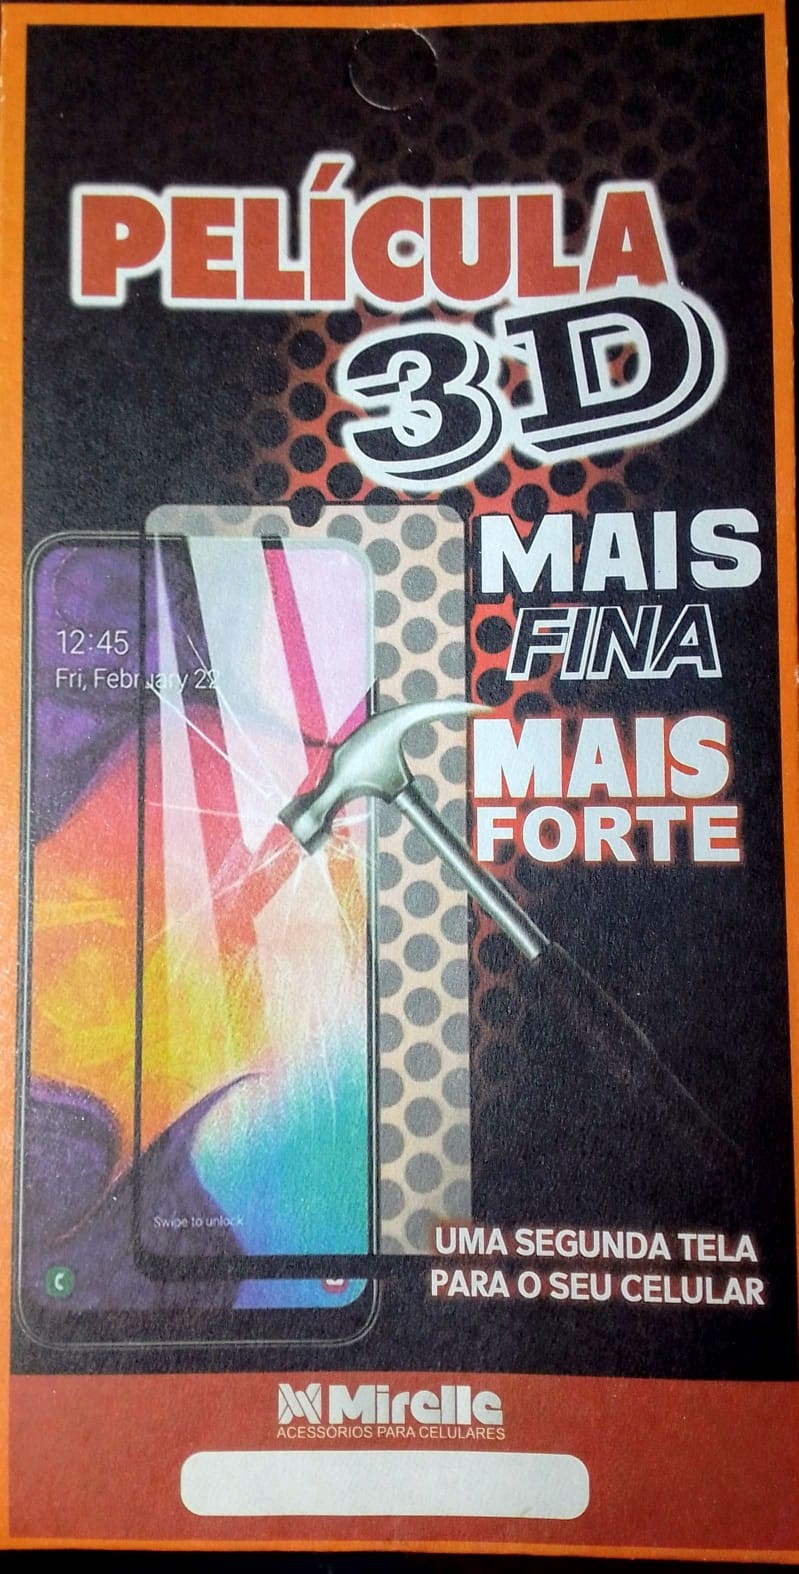  - Pelicula 3D - 1 KIT = 5 UNIDADE            Cod. RM NOTE 9S FINA